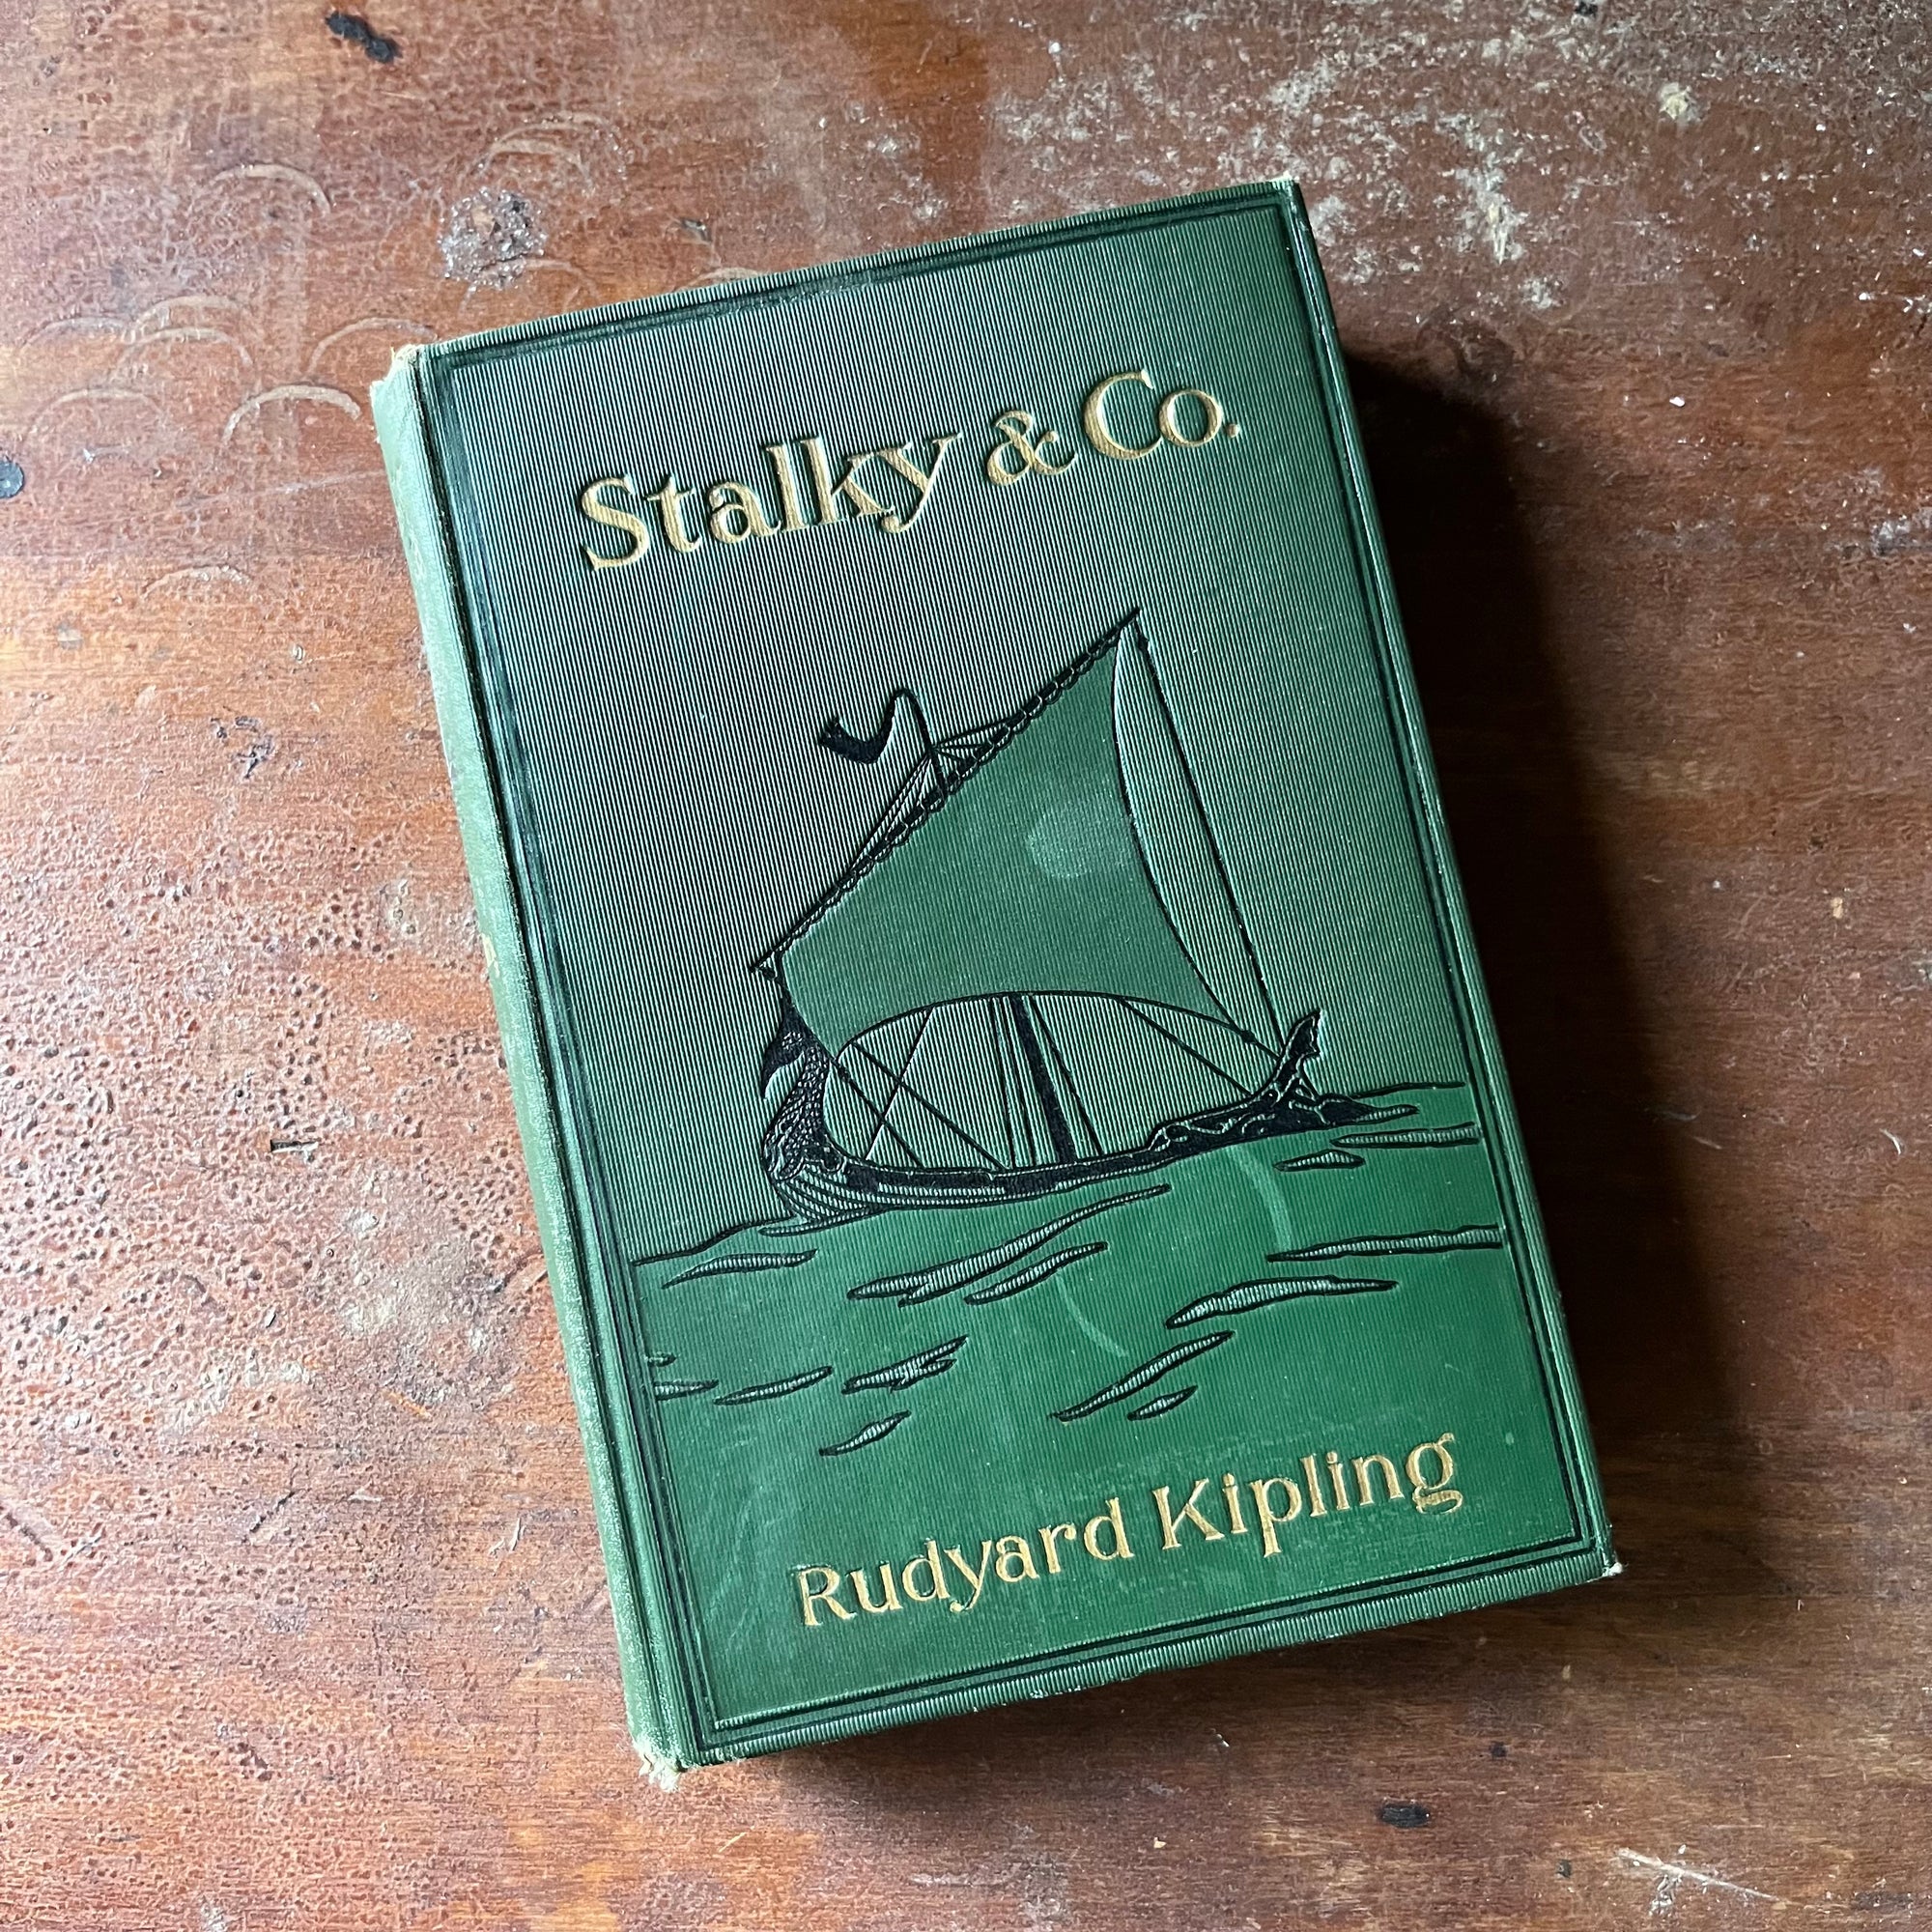 vintage children's chapter book, antique book - Stalky & Co. written by Rudyard Kipling 1899 Edition - view of the embossed front cover